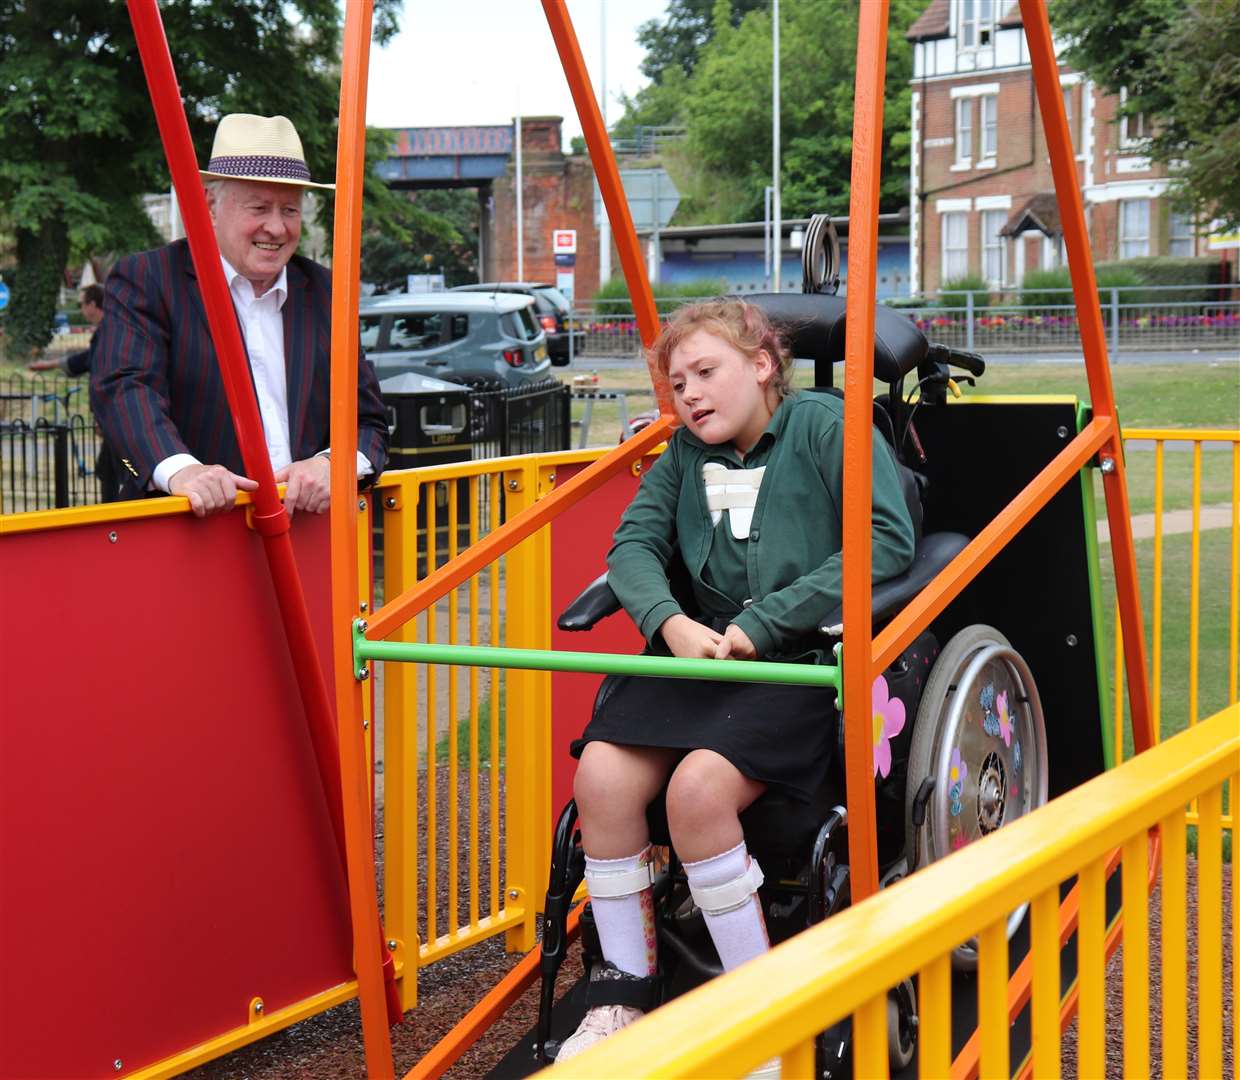 Lucy from Beacon Park School tries out the new wheelchair swing in Radnor Park, Folkestone, watched by council leader Cllr David Monk